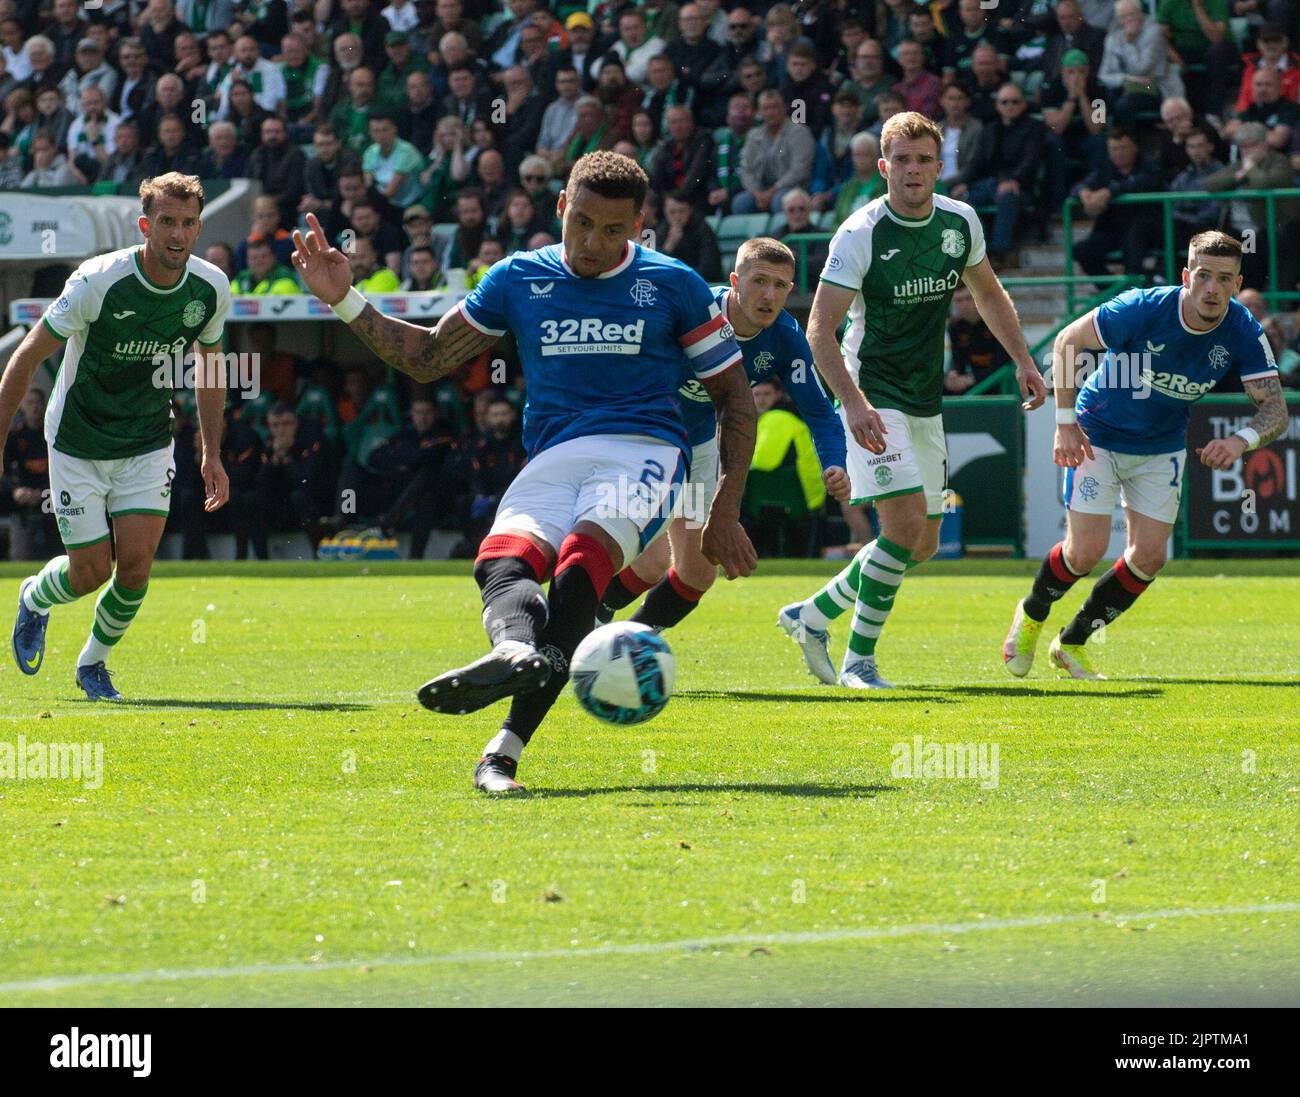 Edinburgh, UK. 20th Aug, 2022. Cinch Premiership - Hibernian v Rangers. 20/08/2022. Hibernian play host to Rangers in the cinch Premiership at Easter Road Stadium, Edinburgh, Midlothian, UK. Pic shows: Ranger's defender, James Tavernier, slots home in the 45th minute to put the visitors 1-0 in front. Credit: Ian Jacobs/Alamy Live News Stock Photo